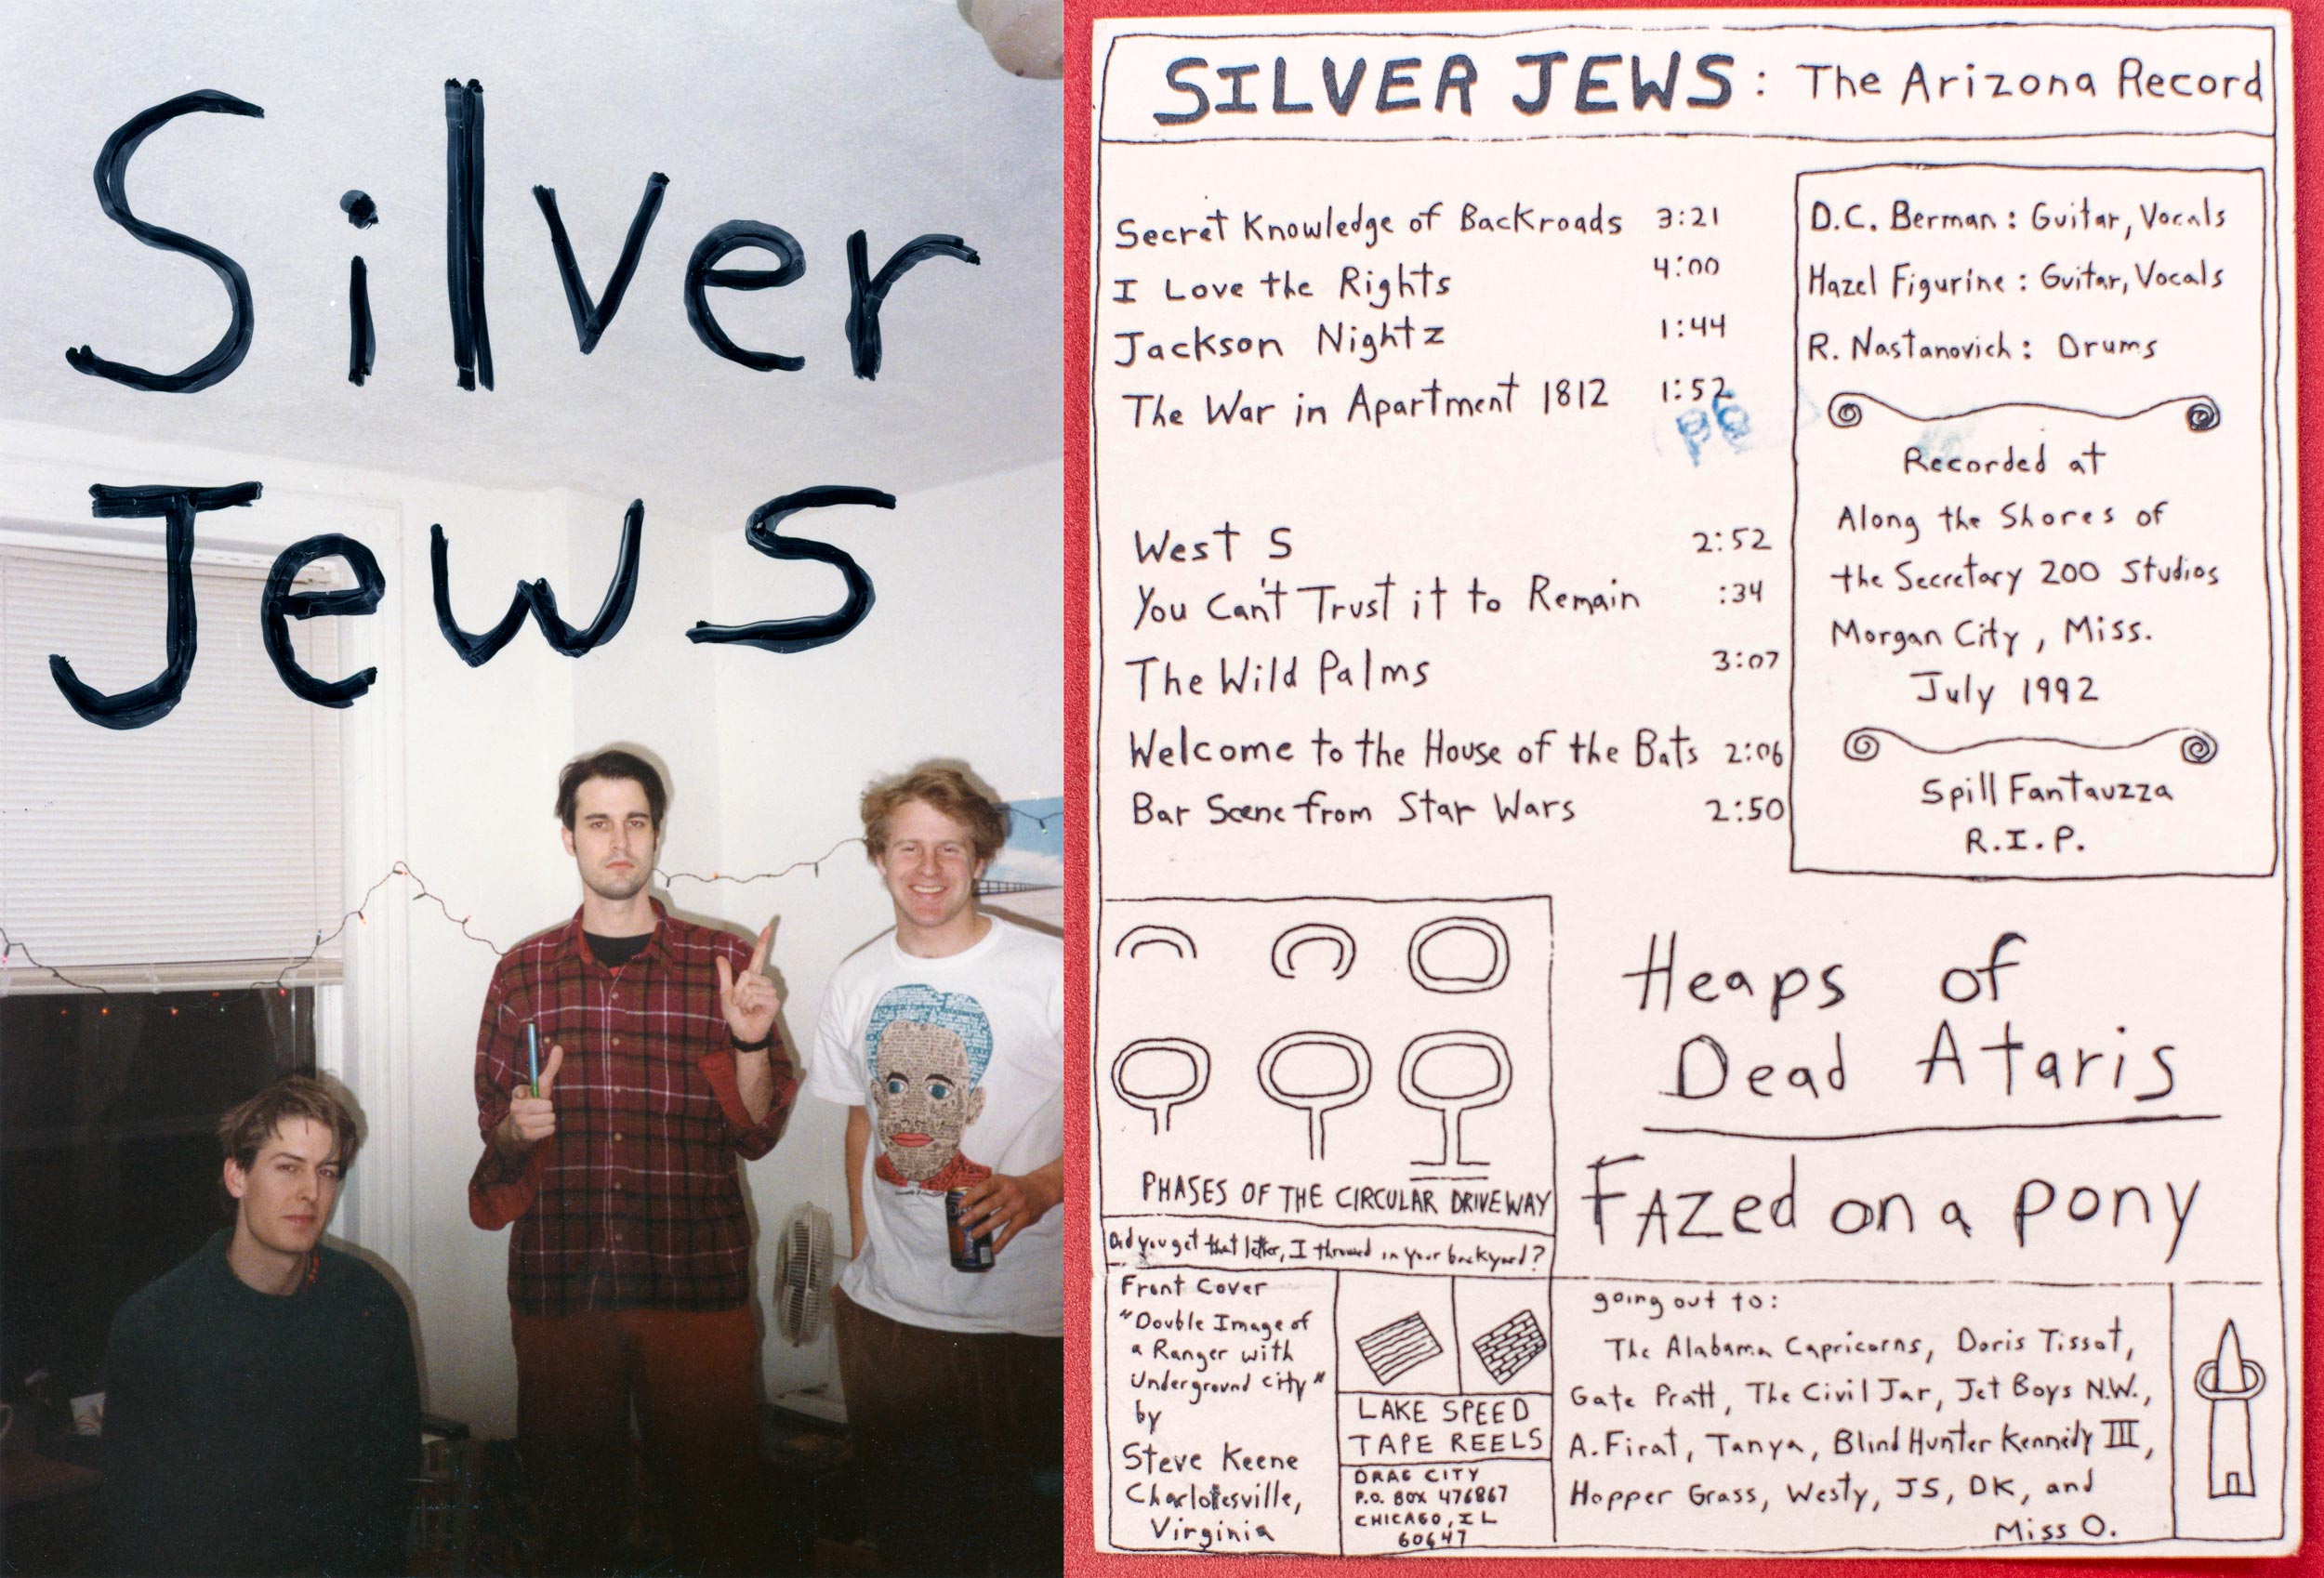 Left: Three men posing for a picture  Right: Silver Jews postcard